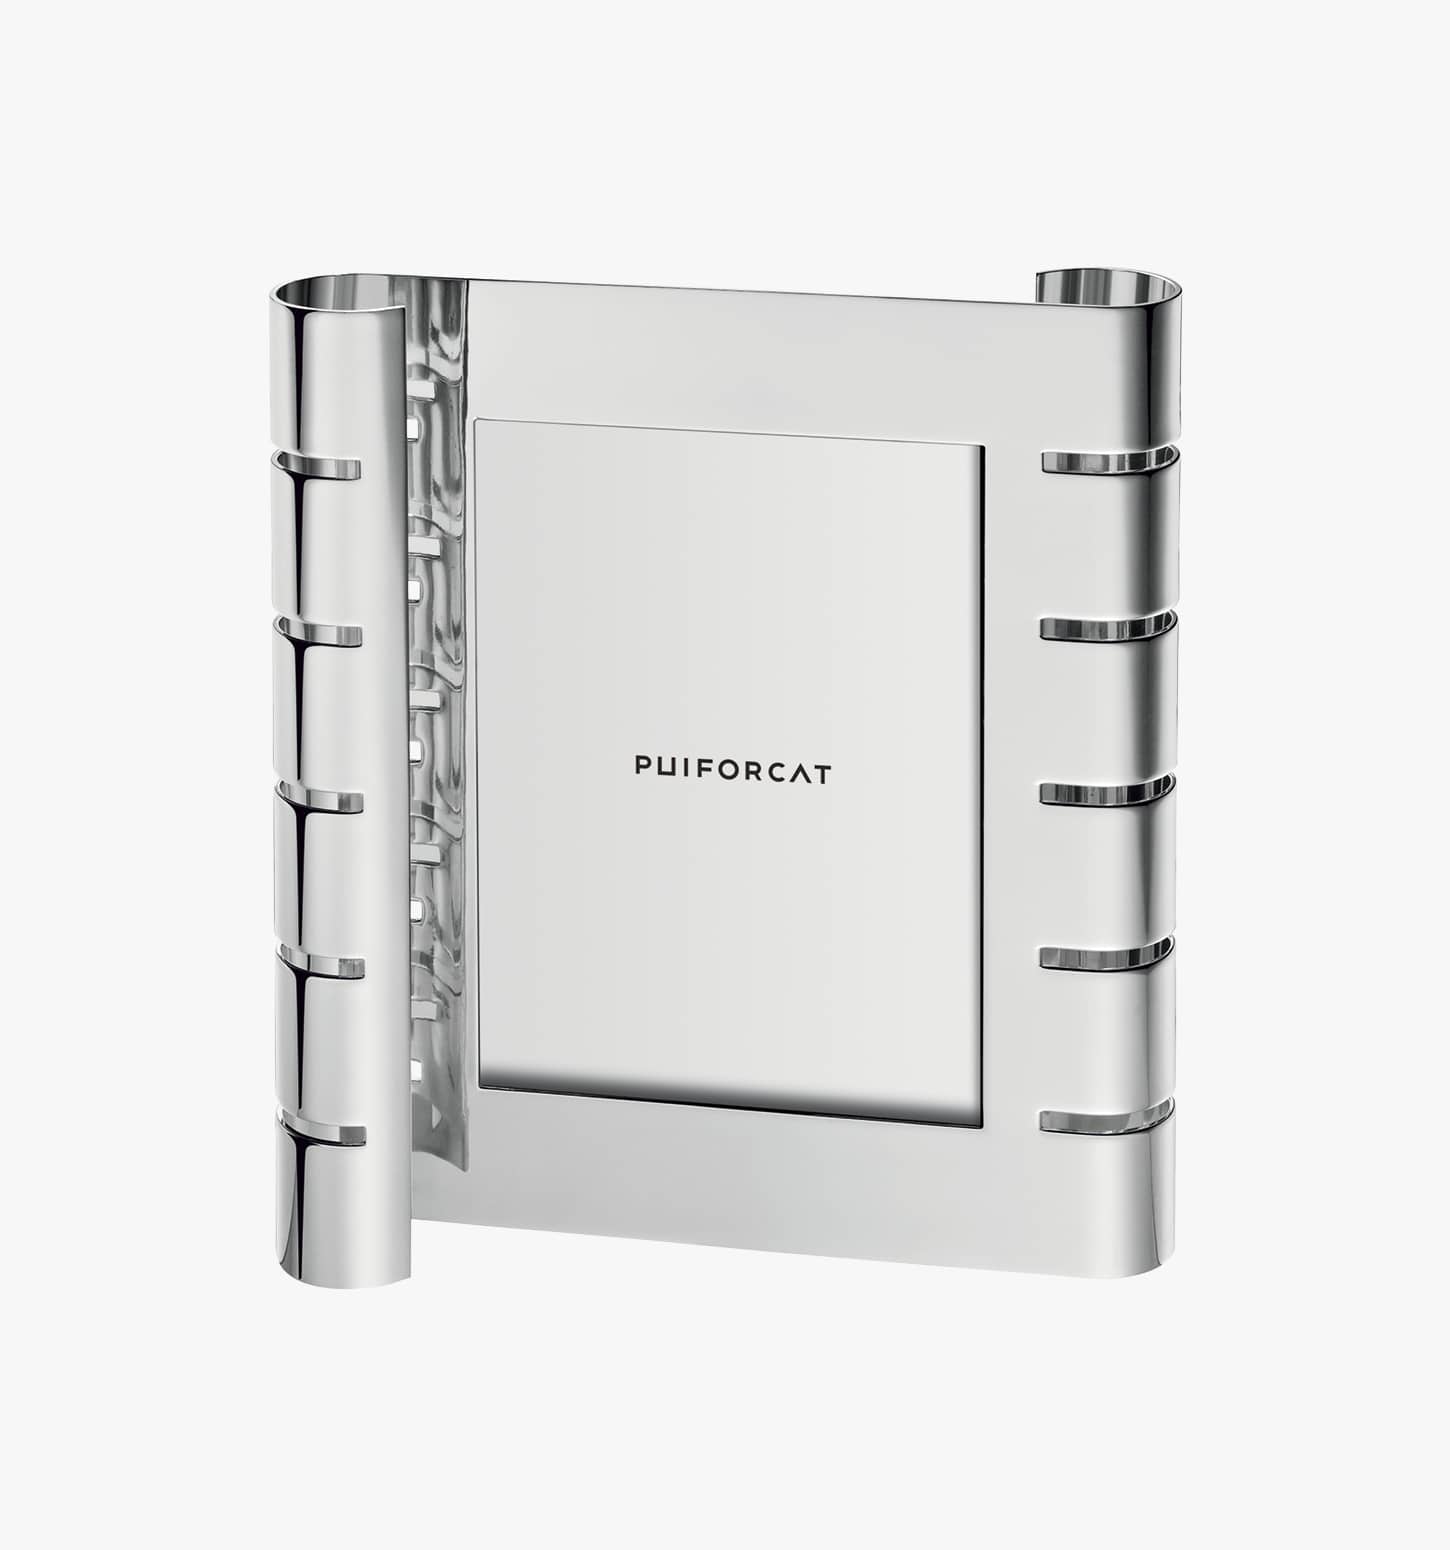 Large vertical picture frame in silver plated from Ruban collection from Puiforcat